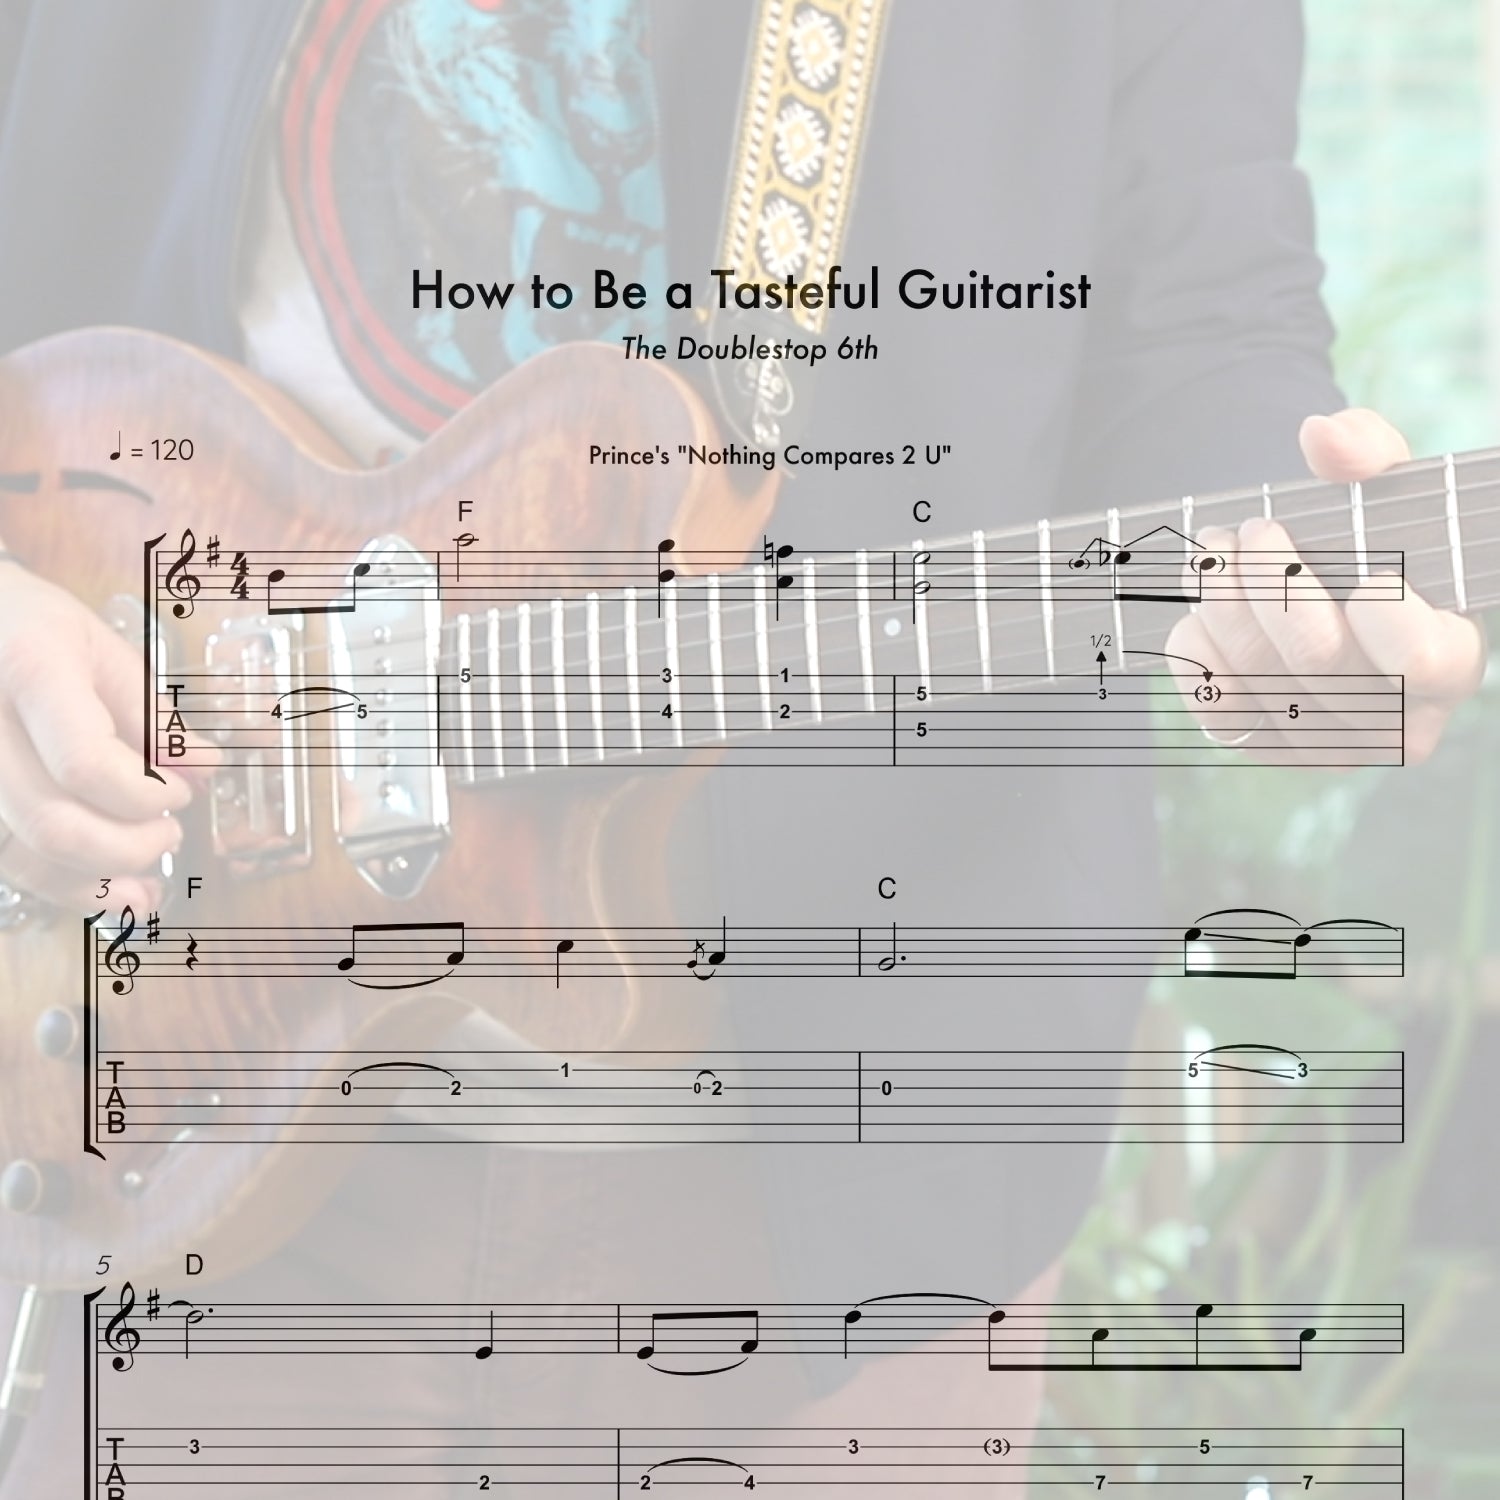 How to Be a Tasteful Guitarist ep 2